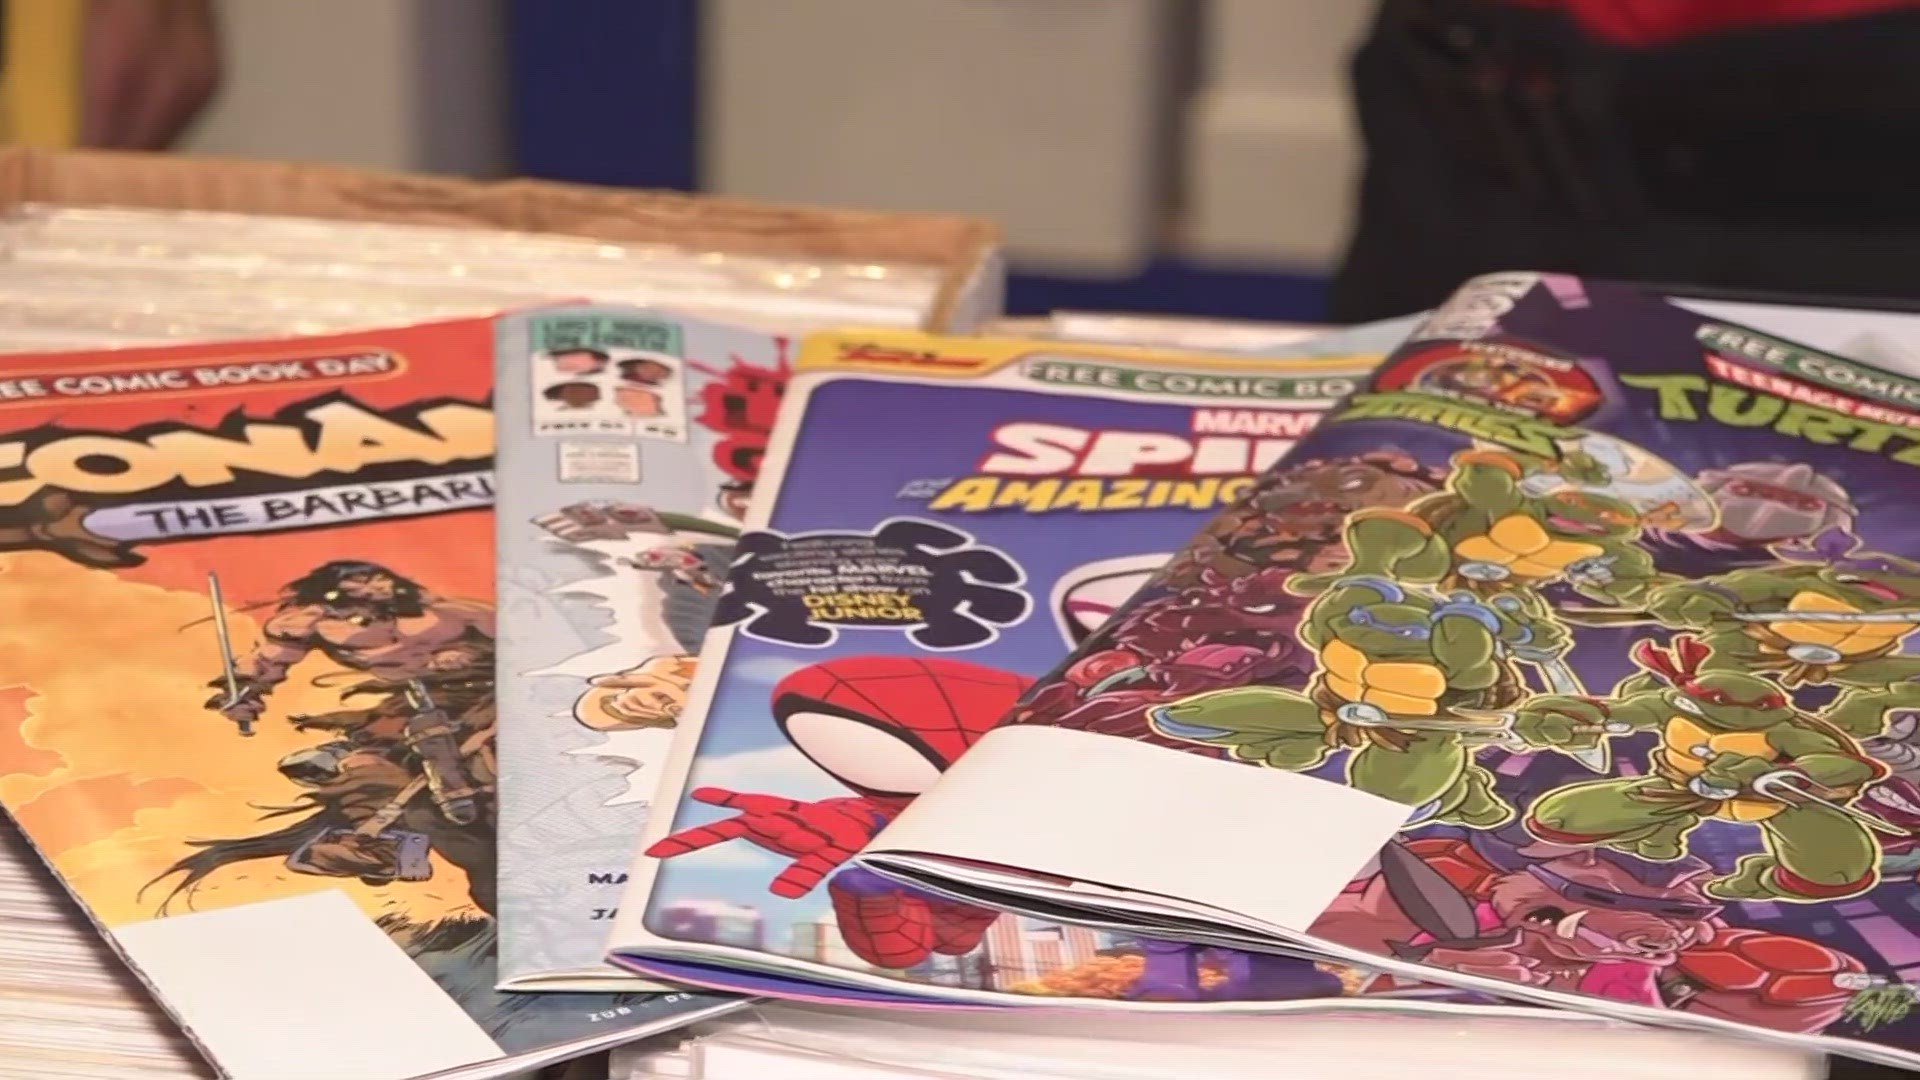 Saturday is Free Comic Book Day! You can get comic books ranging from Spider-Man to Teenage Mutant Ninja Turtles to Scooby Doo.